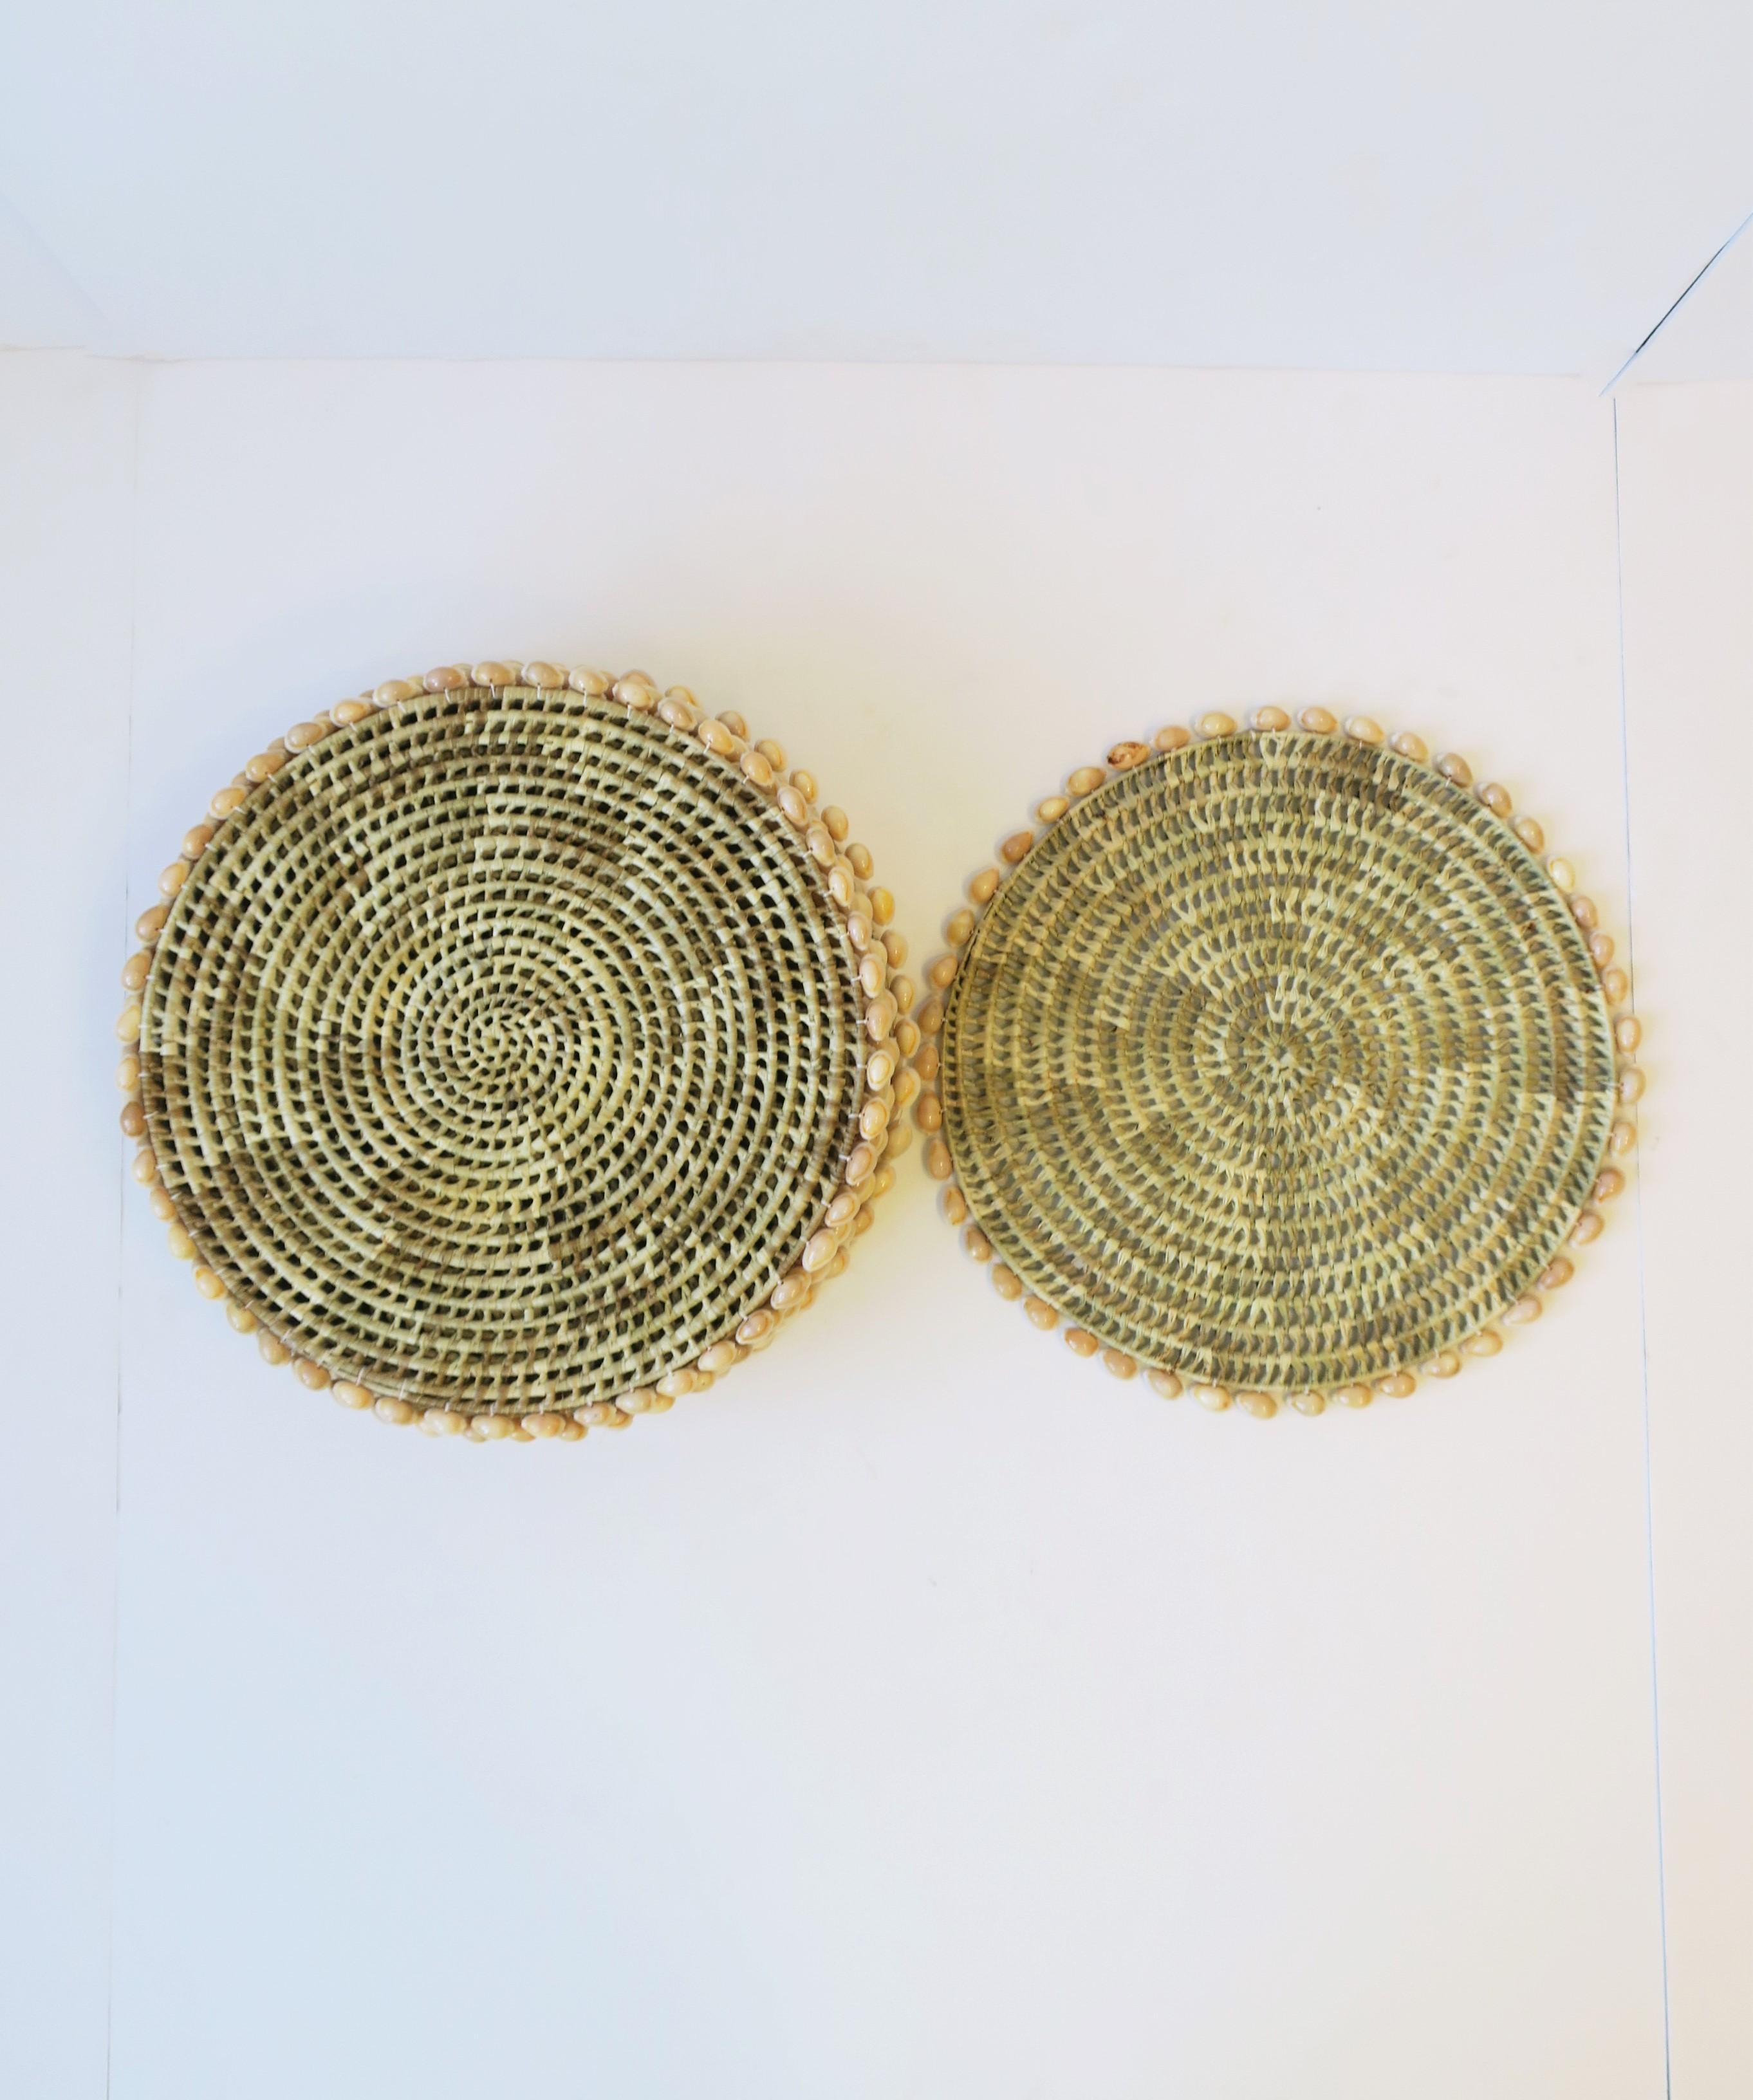 A beautiful set of twelve (12) round wicker and seashell placemats or dinner plate chargers. Seashells outline the wicker placemat / plate charger. A great set for summer, holiday, home, yacht, entertaining, etc., indoors or out. Dimensions: 15